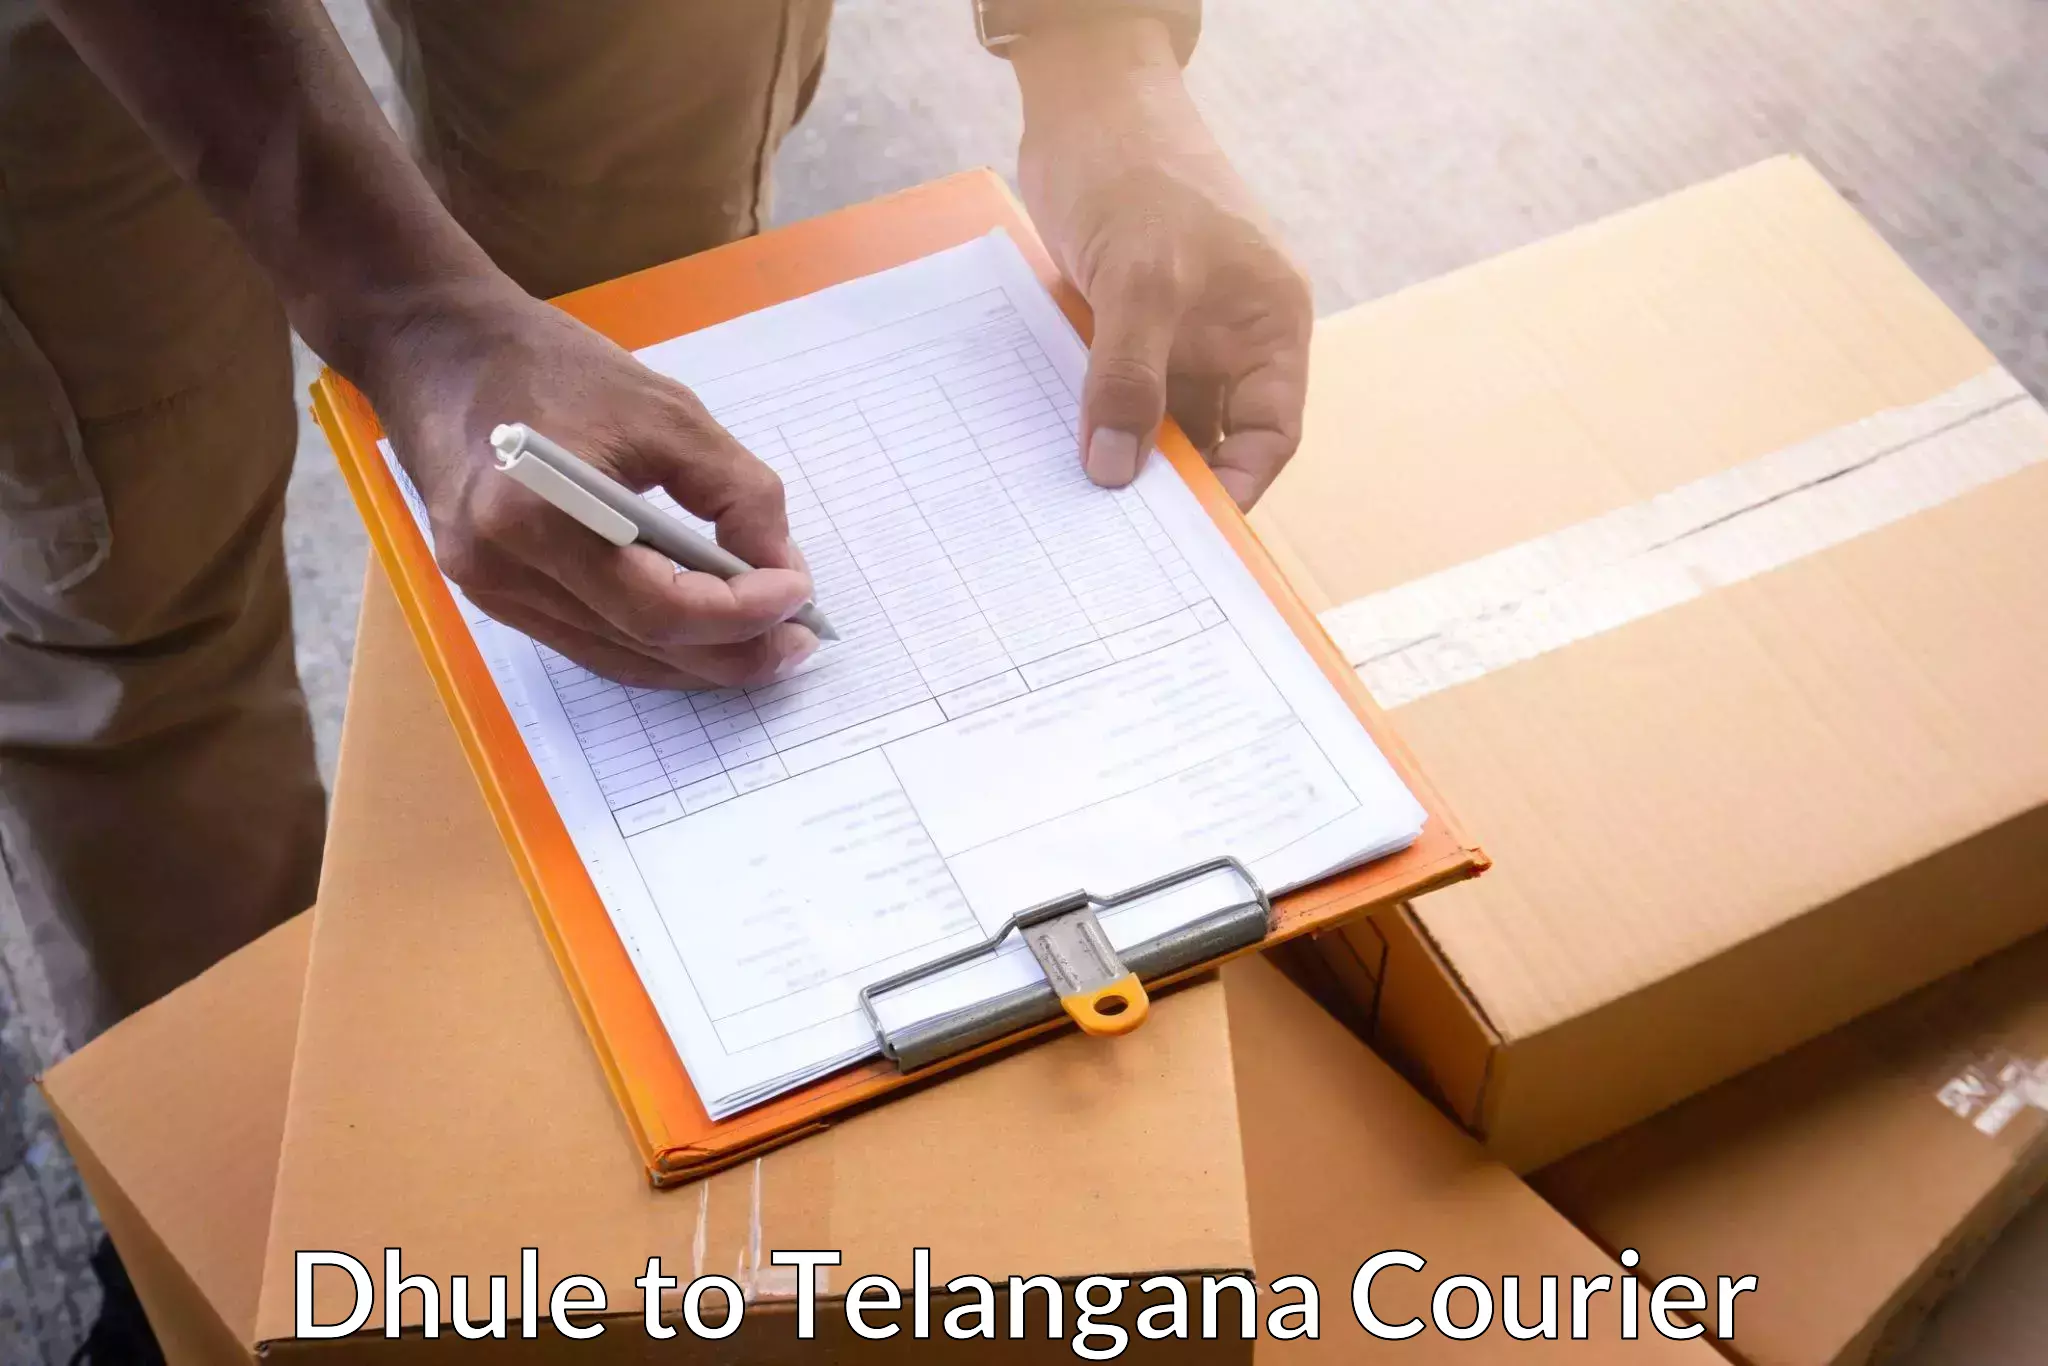 Courier service efficiency Dhule to Secunderabad